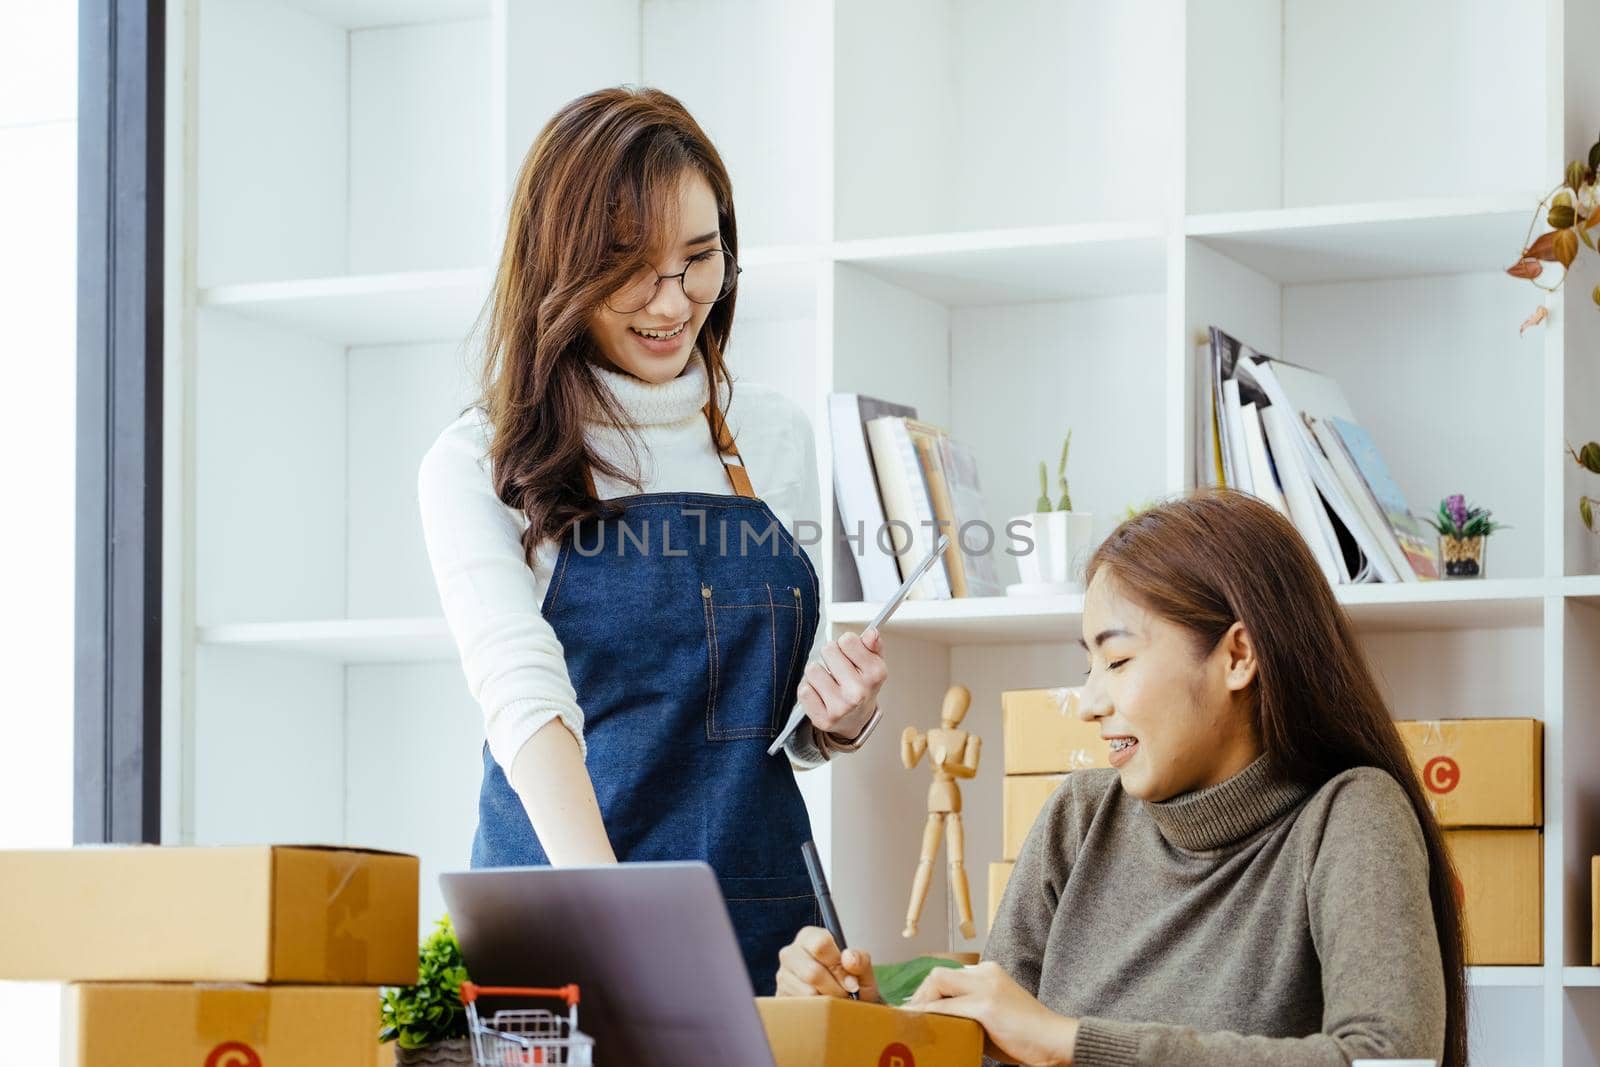 selling products online, the focus is on the face of a woman in white pointing to a friend to write down the shipping address for the customer and prepare it for postage. by Manastrong